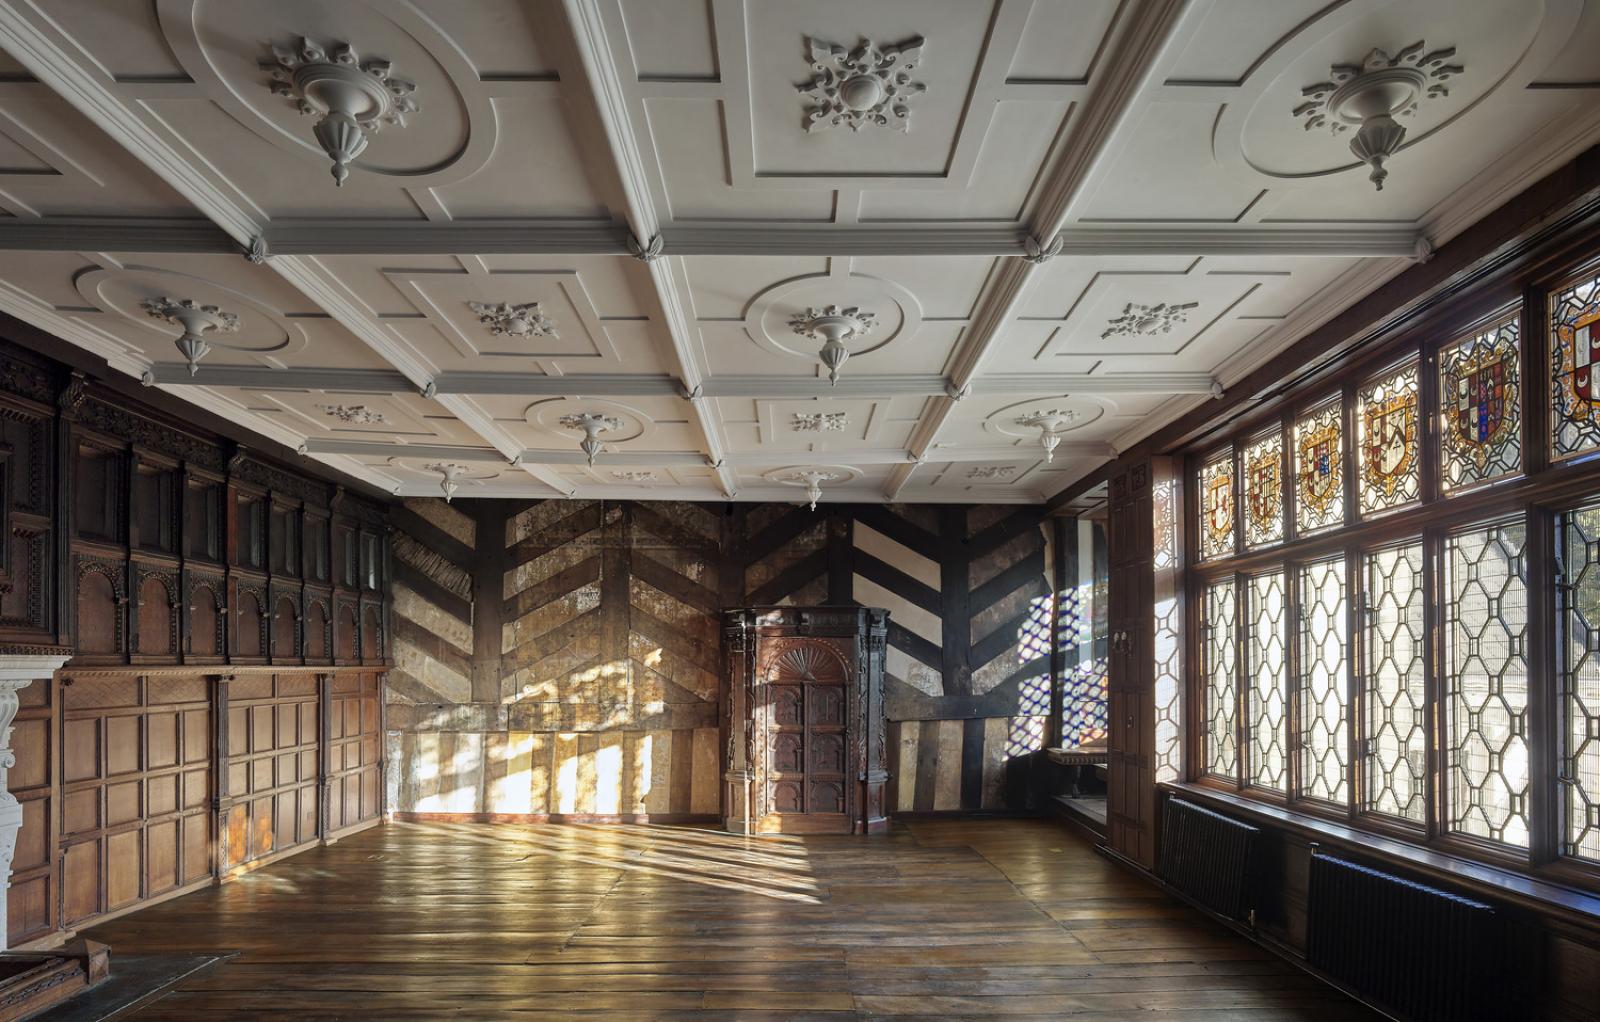 Interior of a 16th century manor house. The building, which was destroyed by fire, has been restored. Light is filtering through the window.